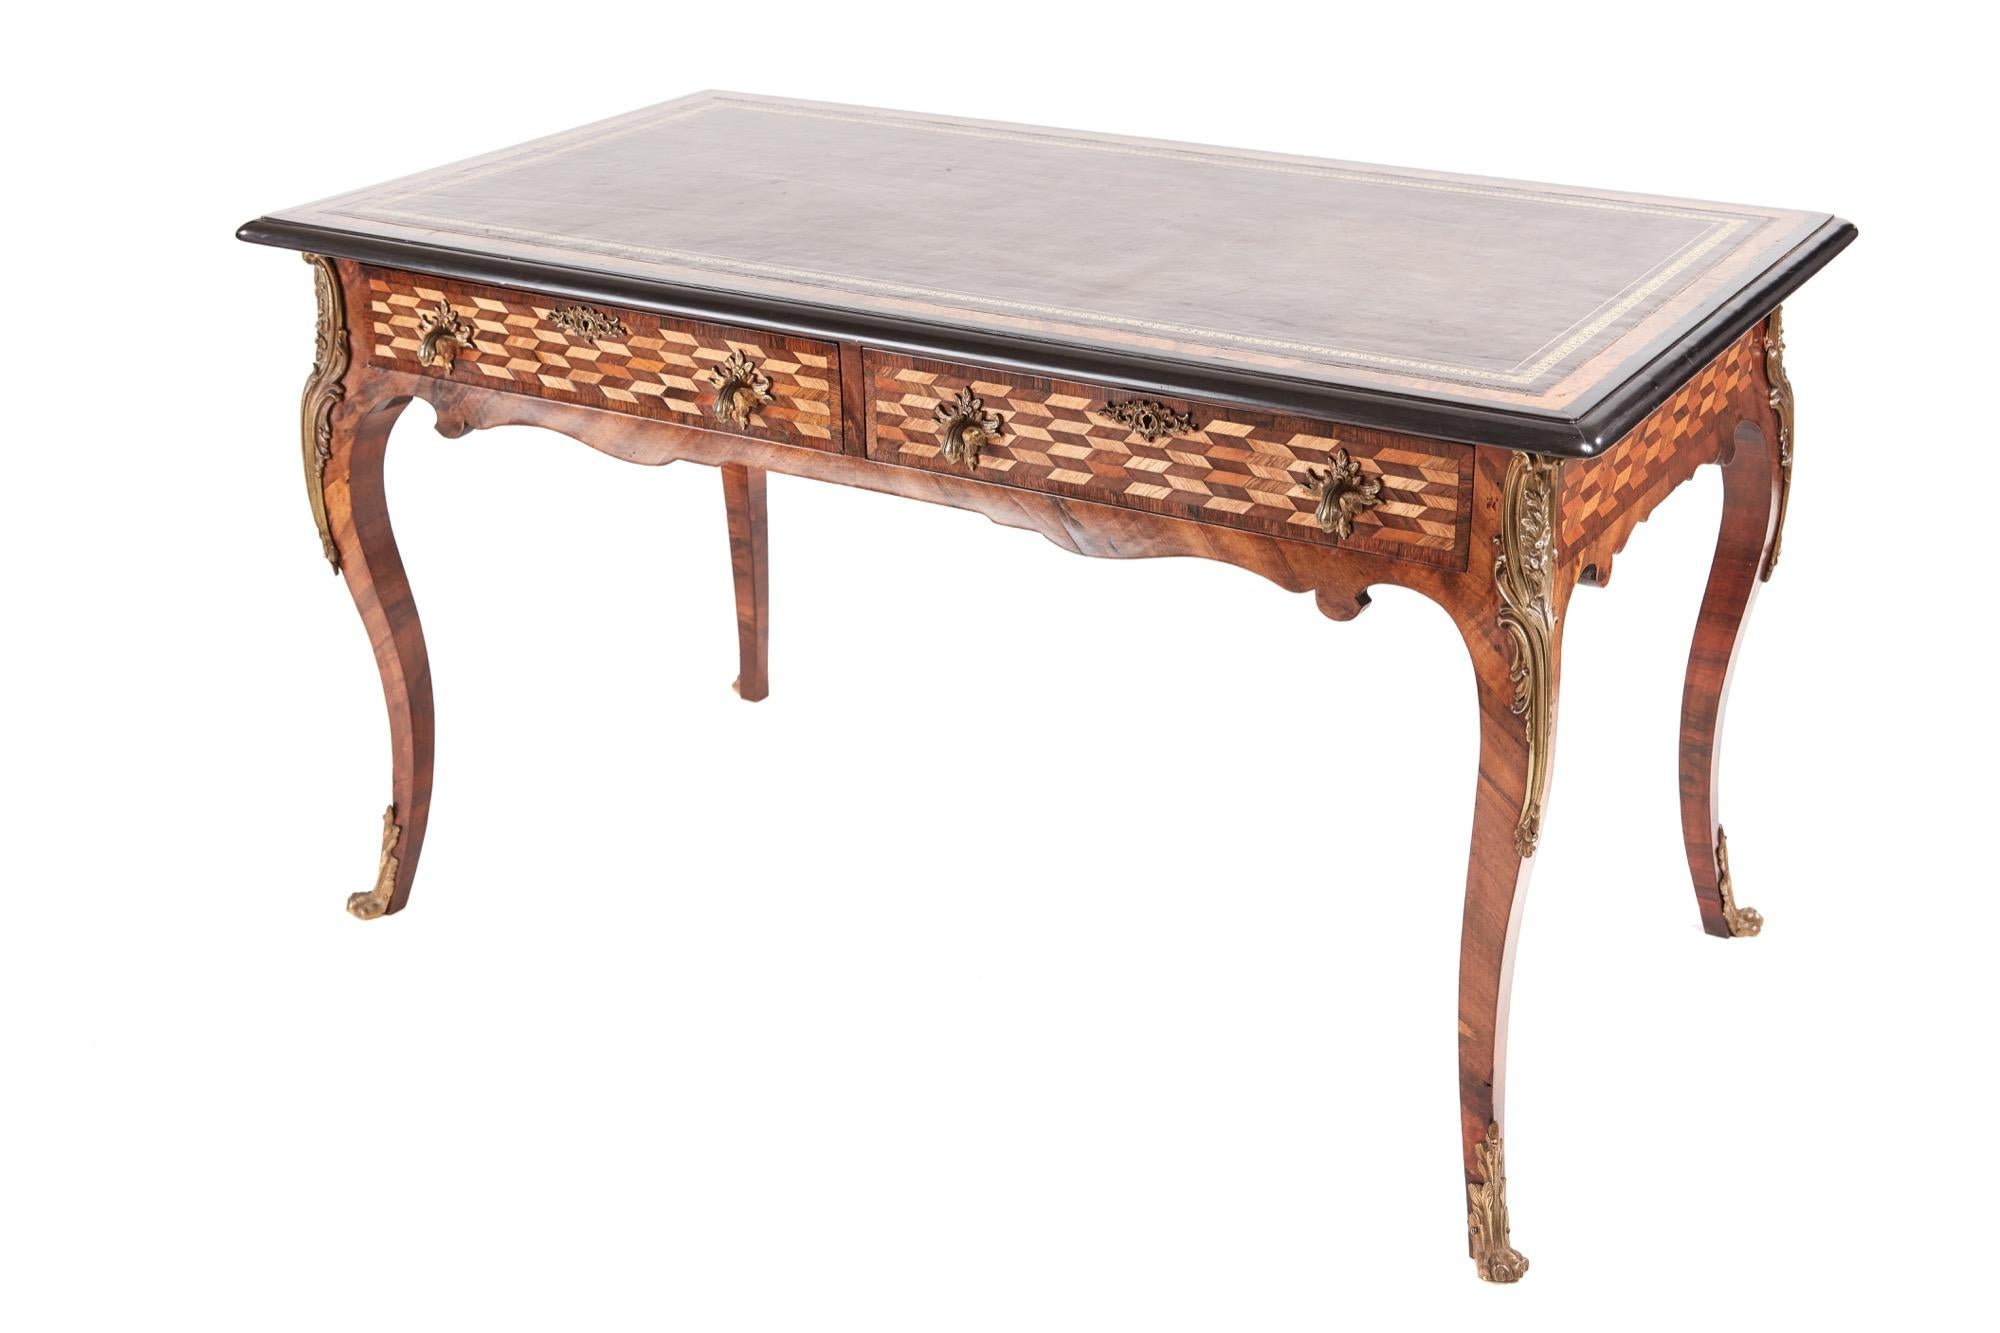 Inlay Fine French 19th Century Victorian Parquetry and Ormolu-Mounted Bureau Plat Desk